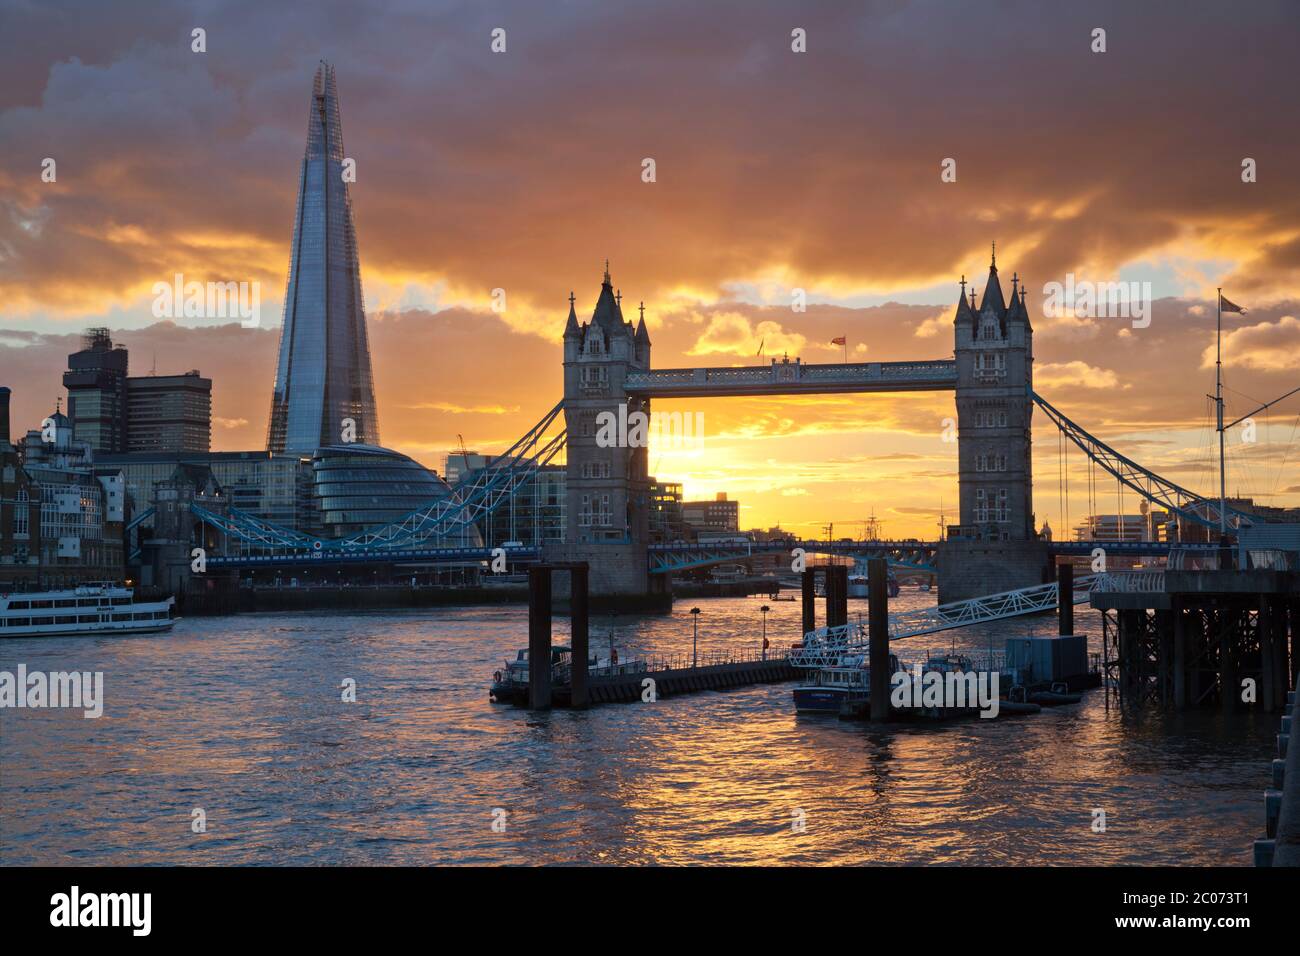 The Shard and Tower Bridge on the River Thames at sunset, London, England, UK Stock Photo